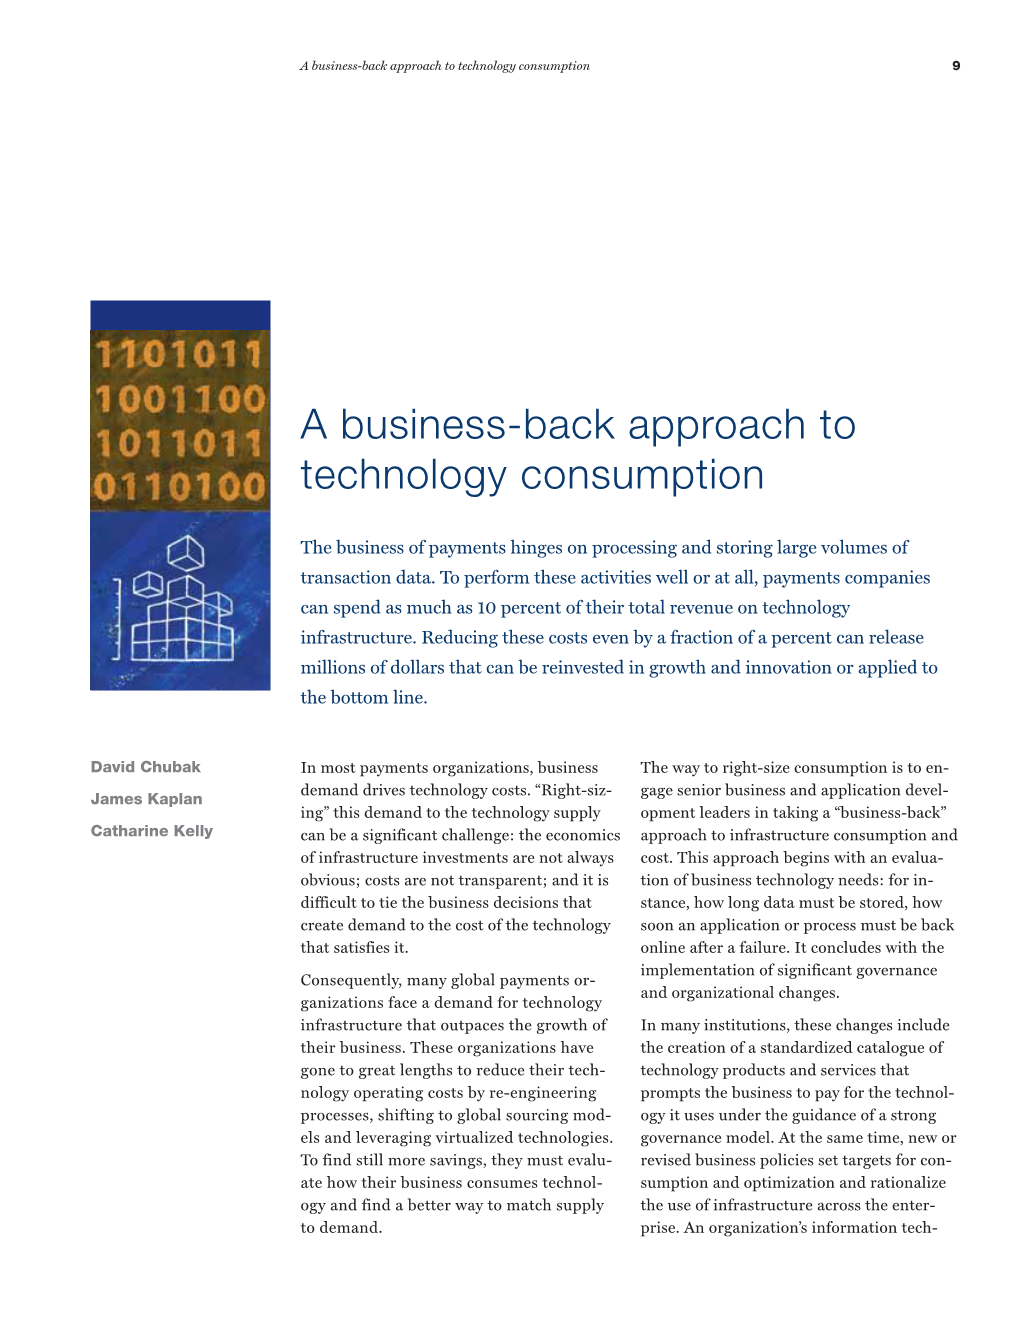 A Business-Back Approach to Technology Consumption 9